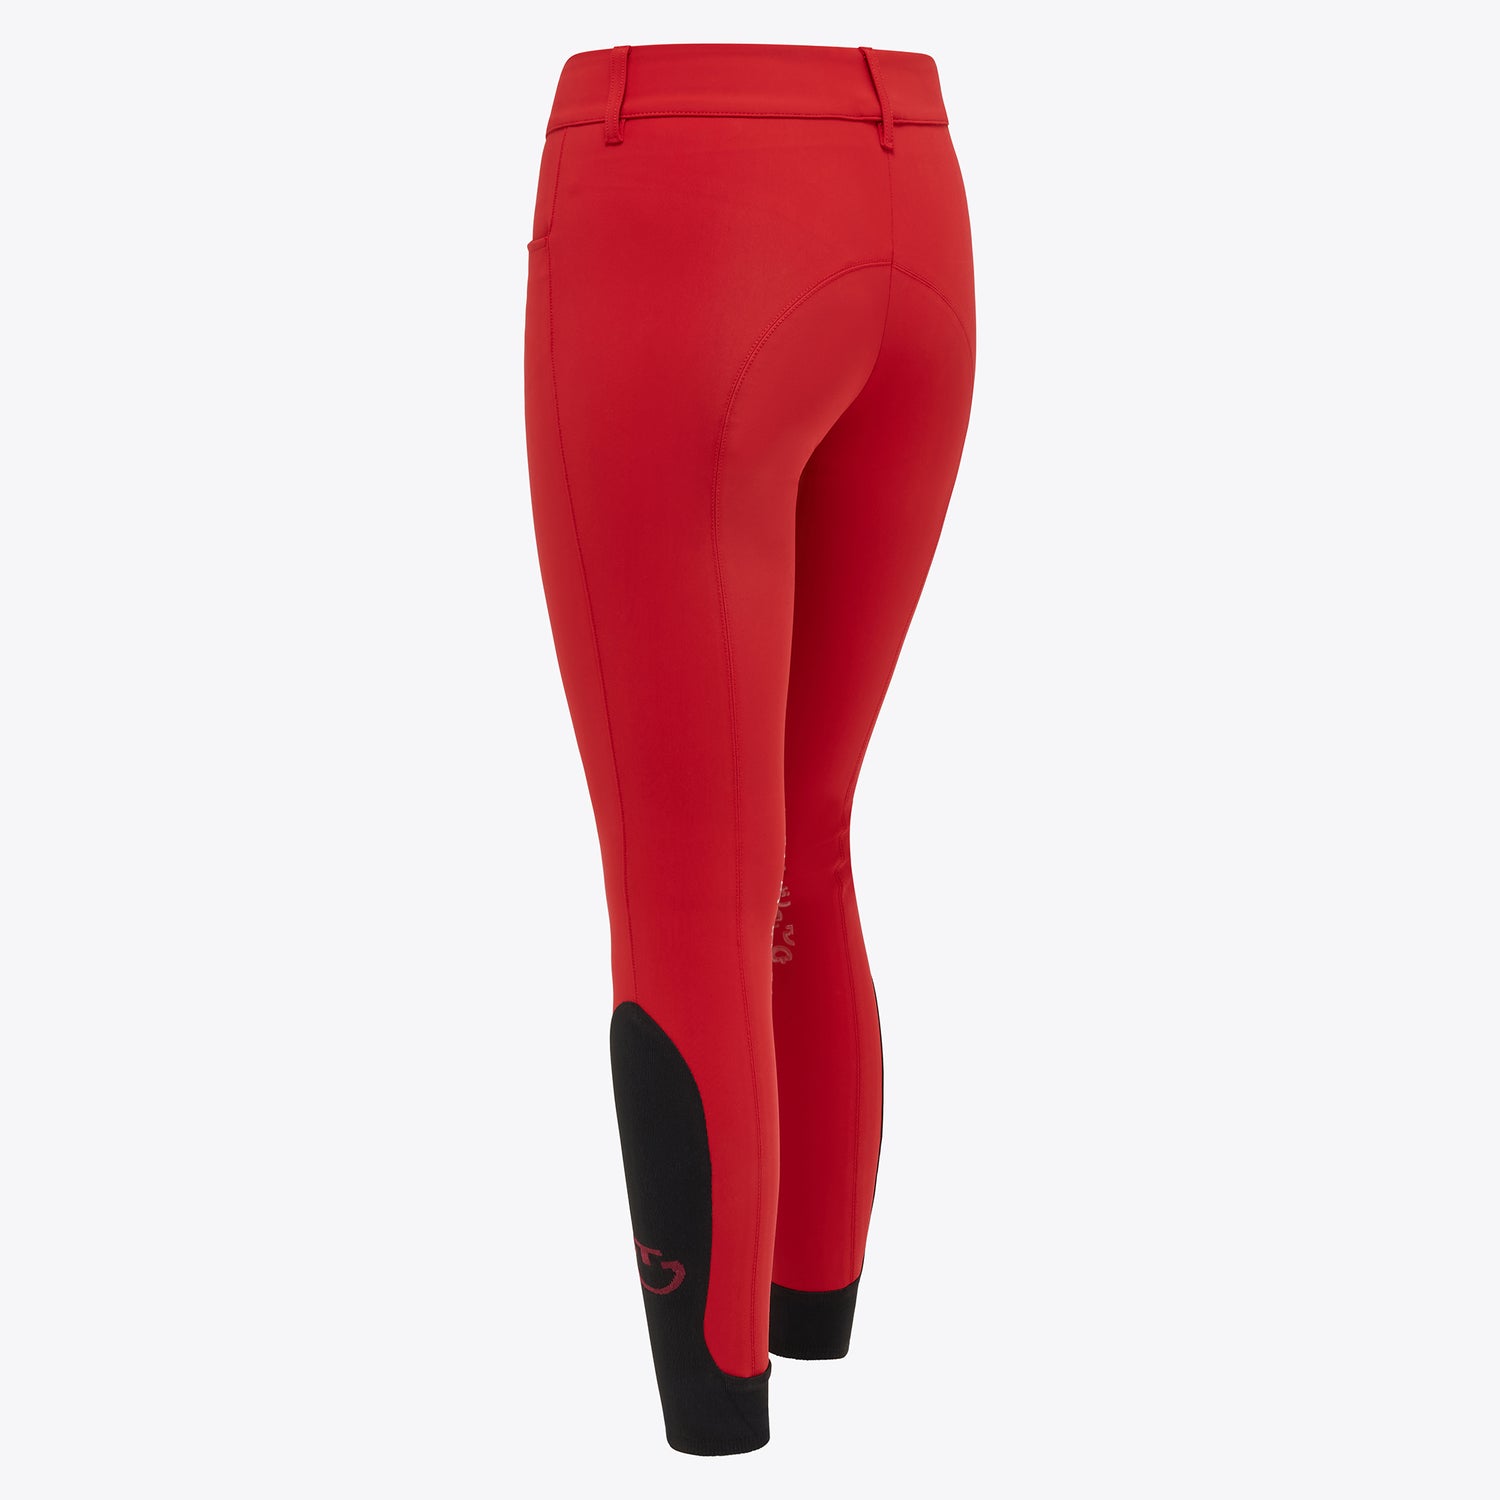 Red Horse riding breeches